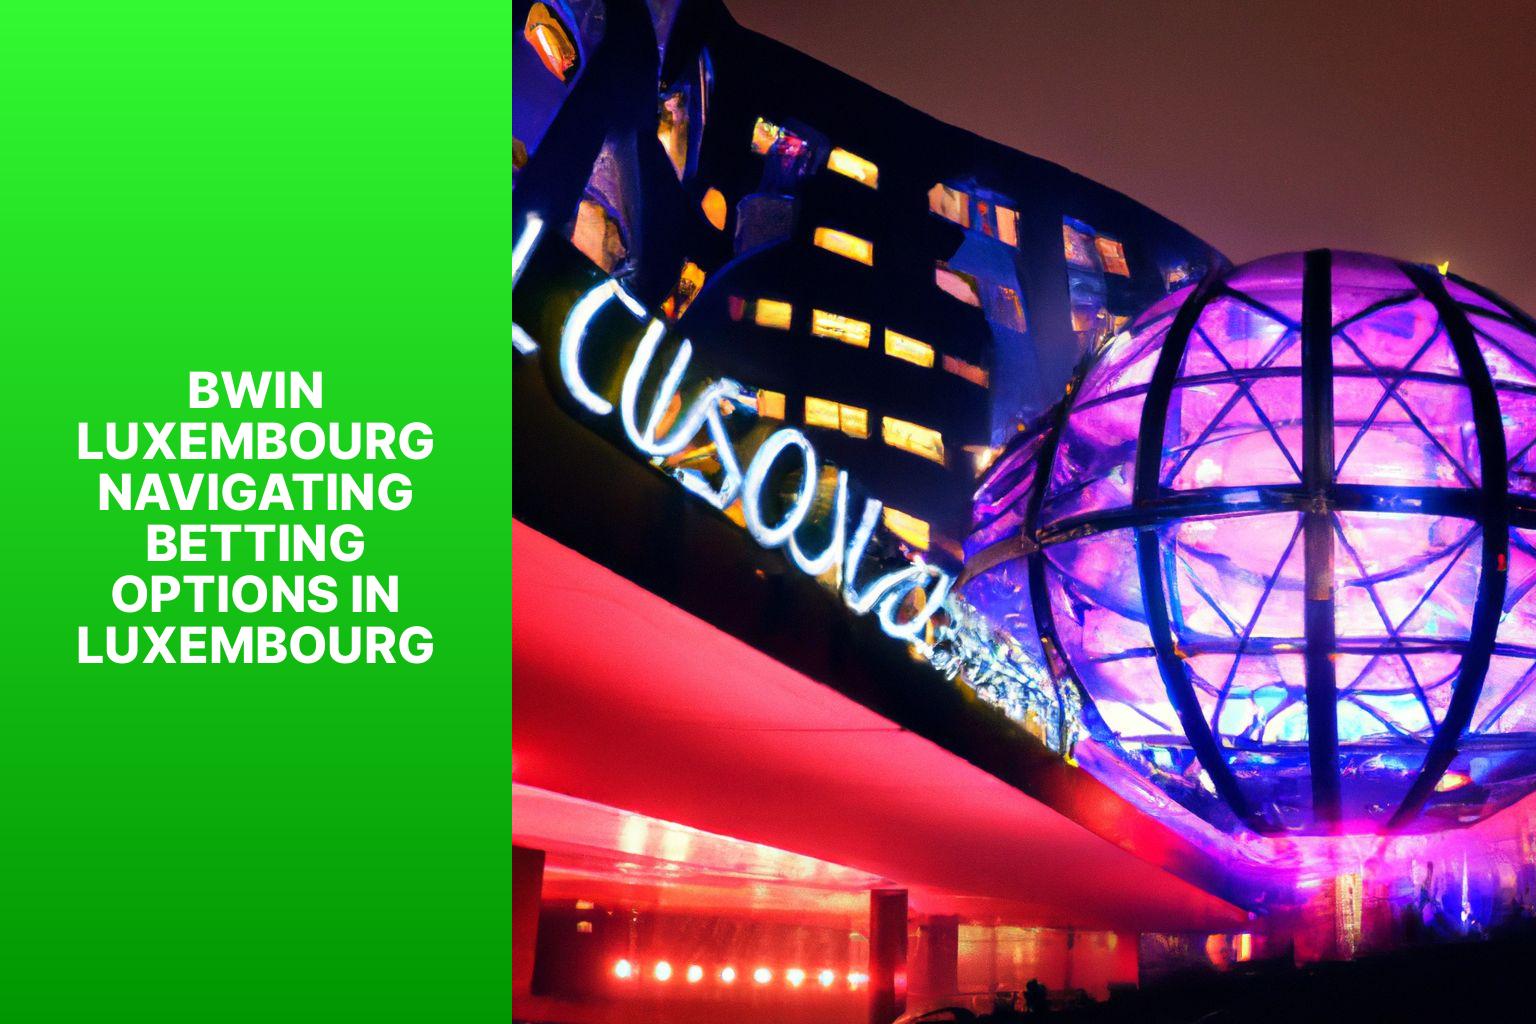 Bwin Luxembourg Navigating Betting Options in Luxembourg